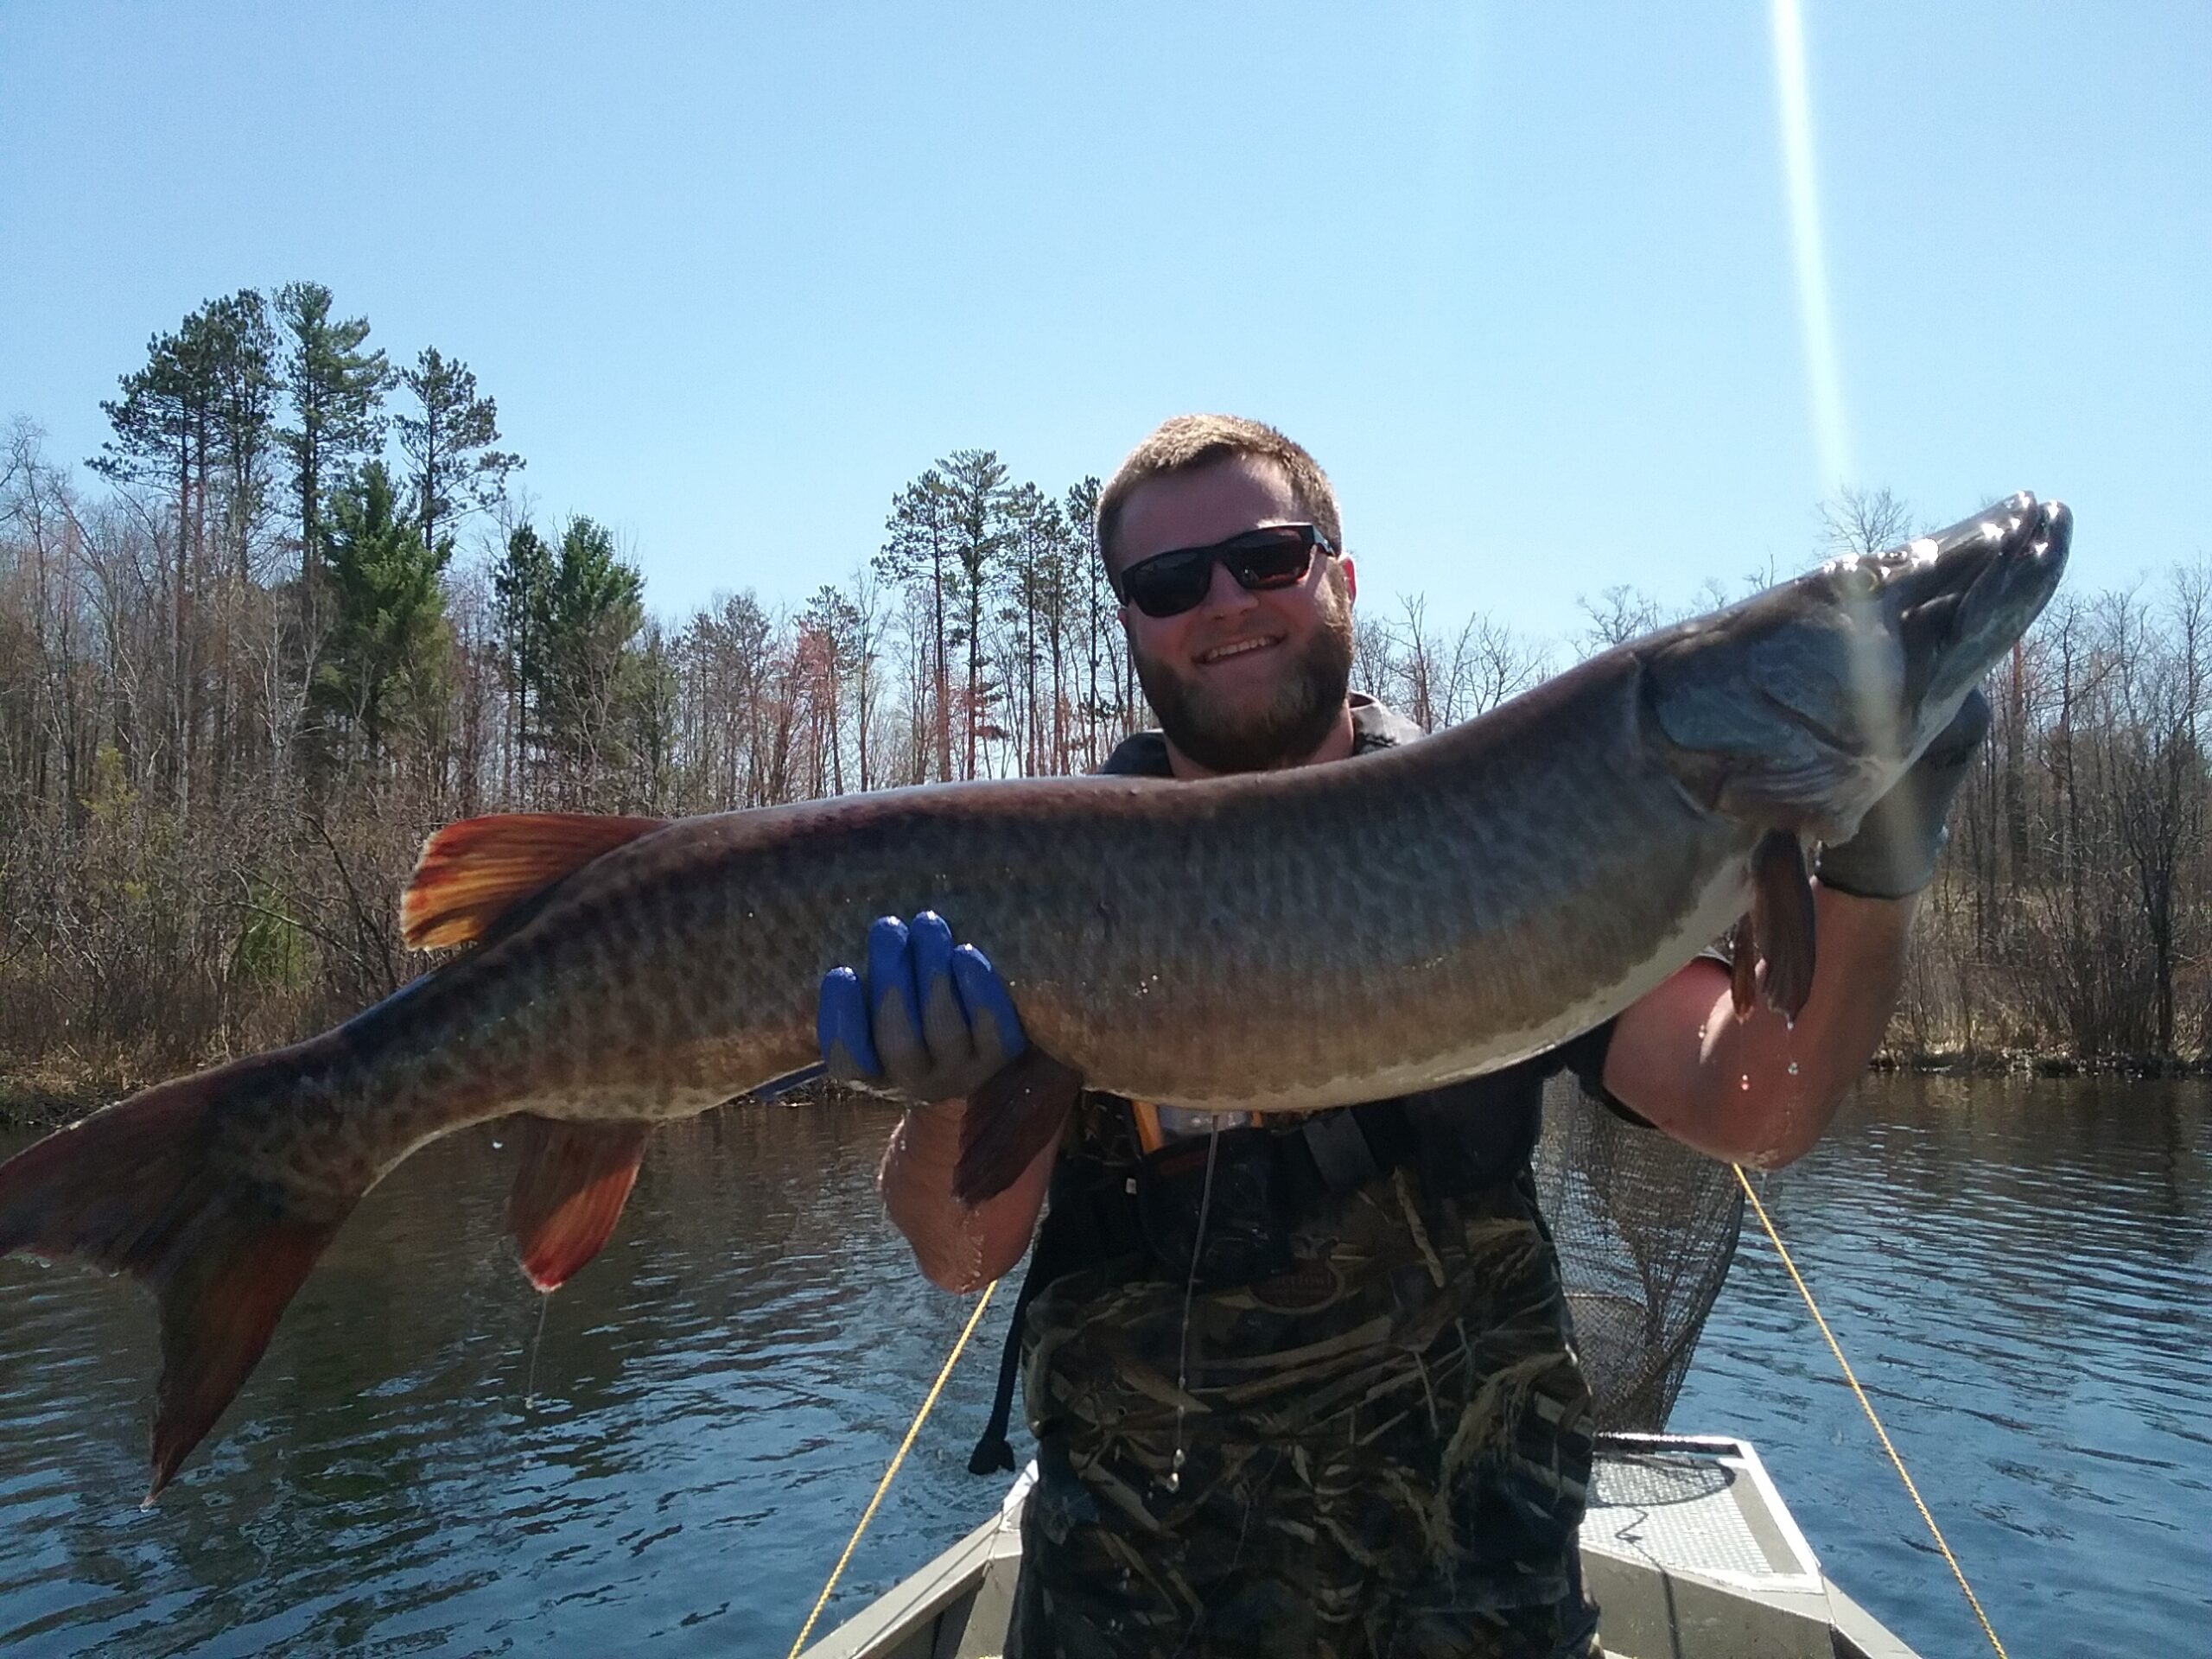 Adult muskellunge surveyed as part of the muskellunge age and growth study